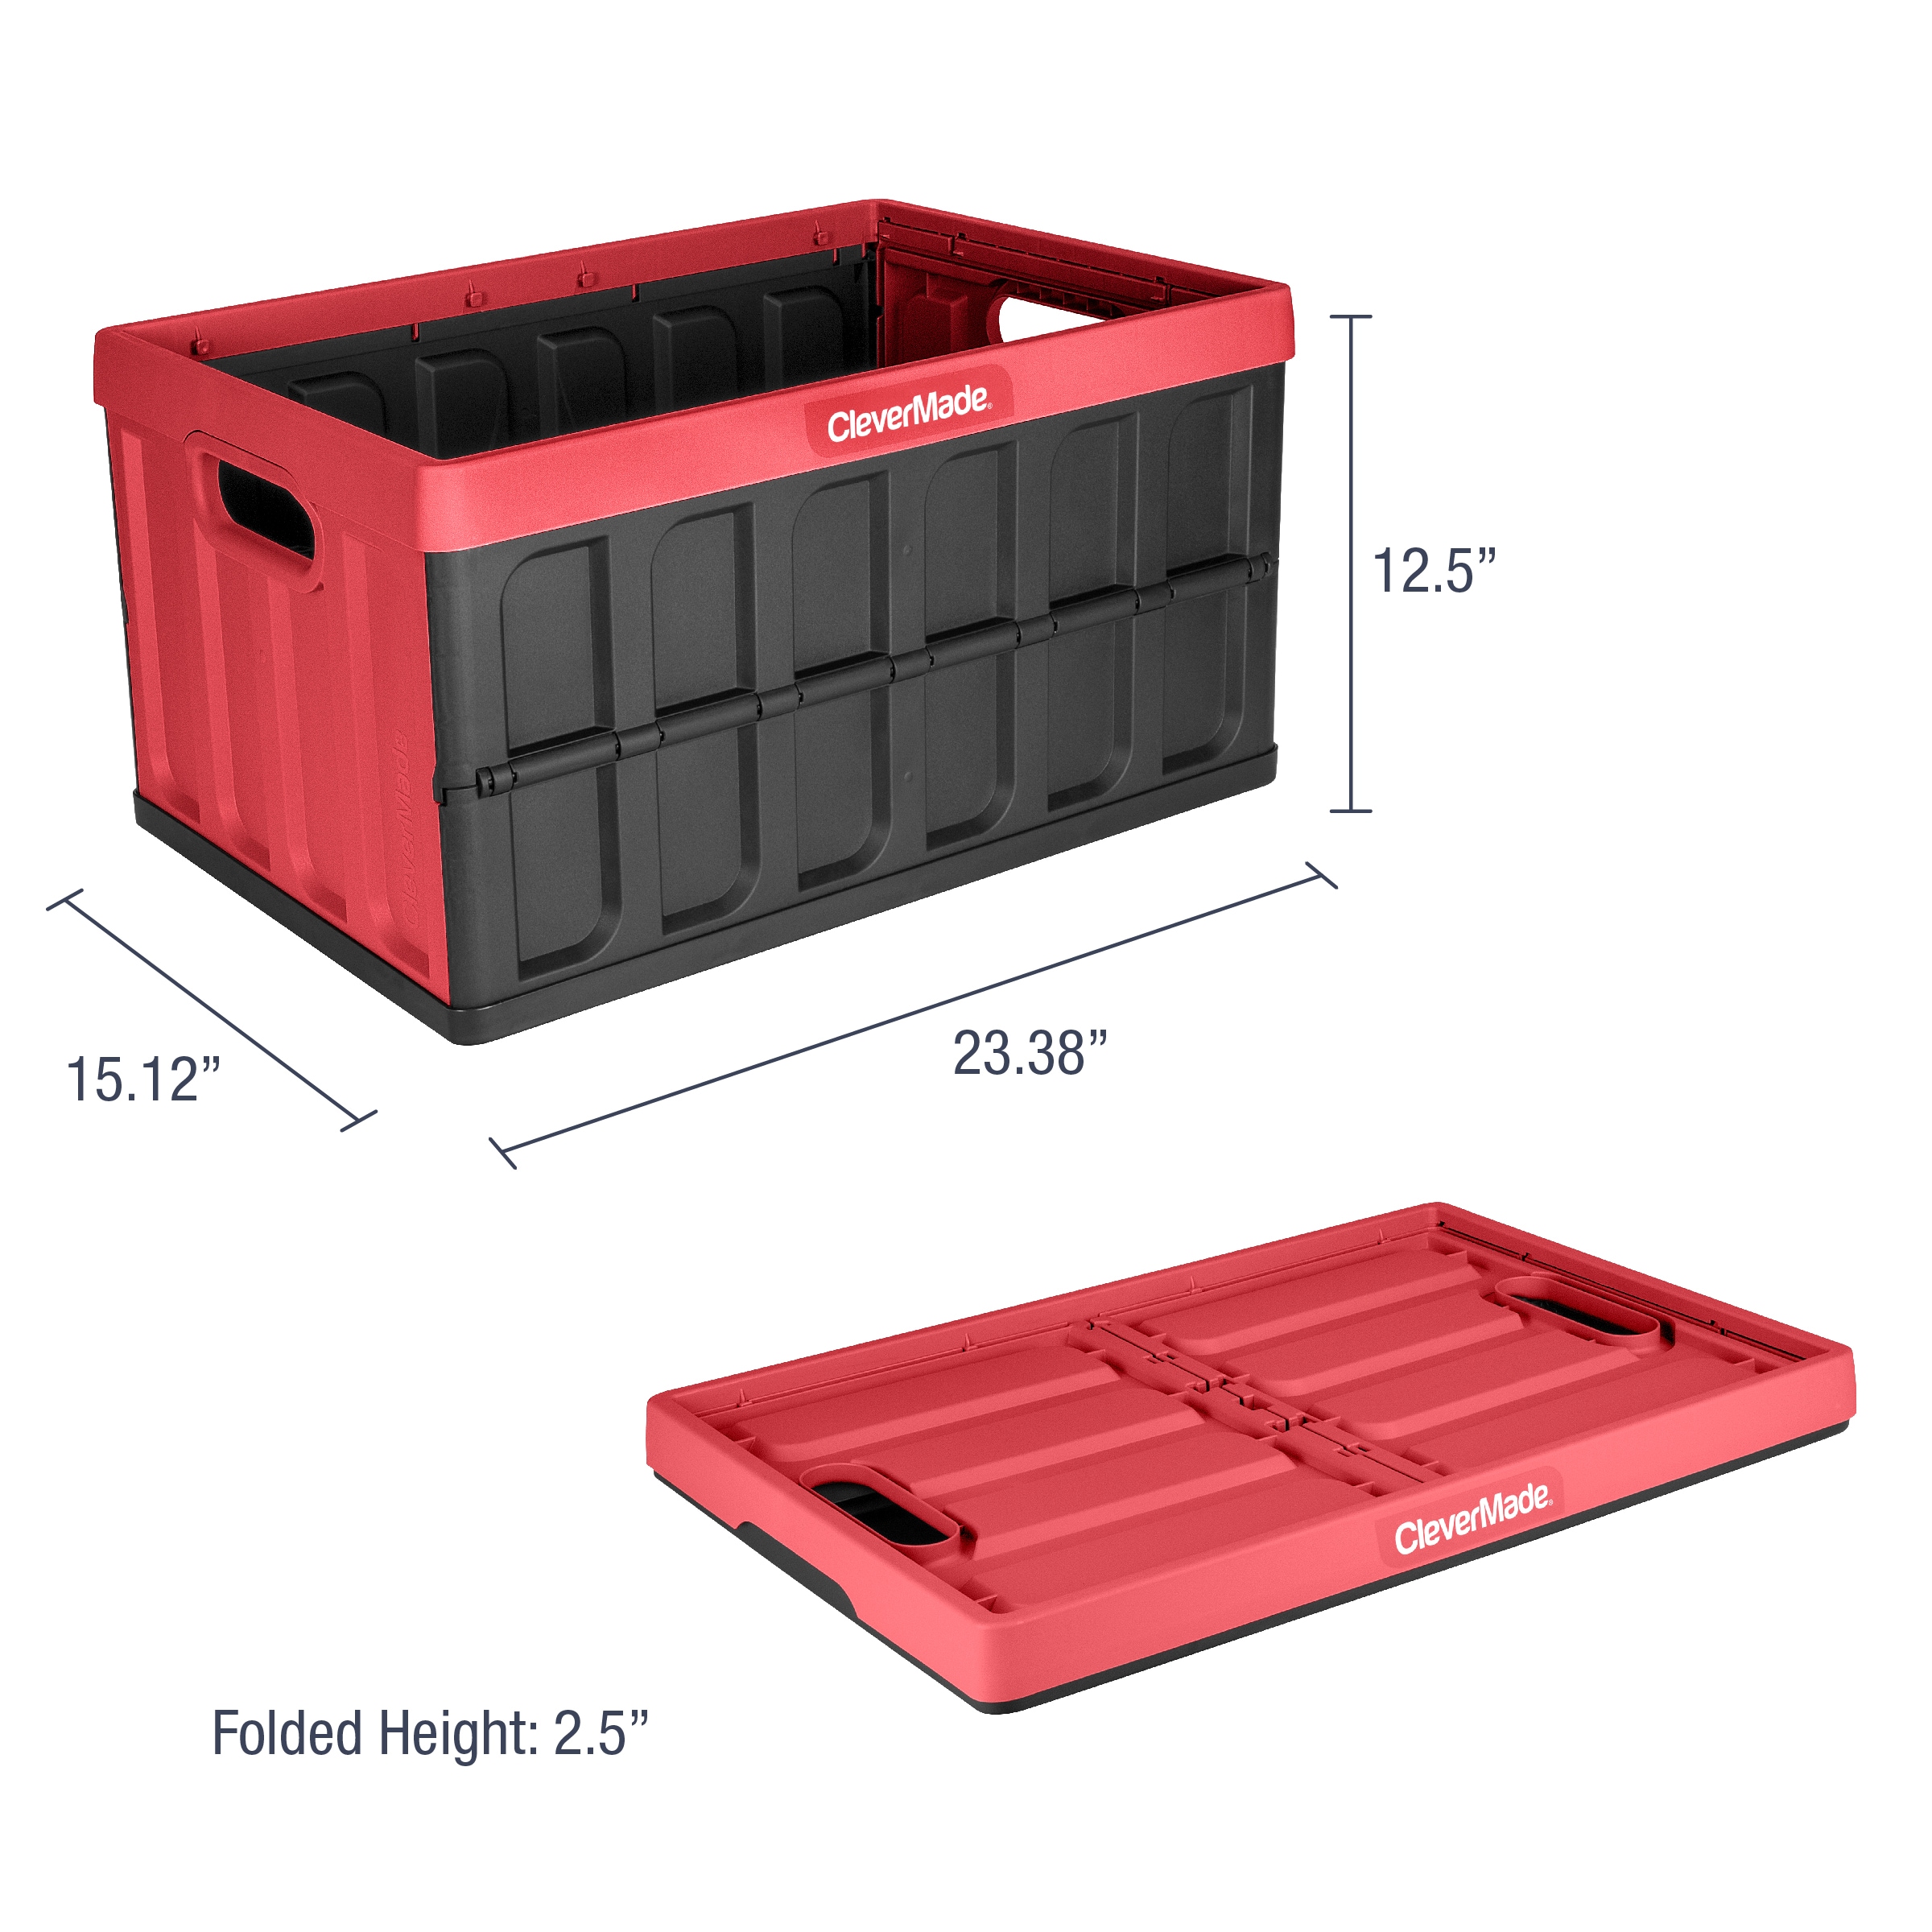 Red Large Plastic Storage Bin, Pack Of 3